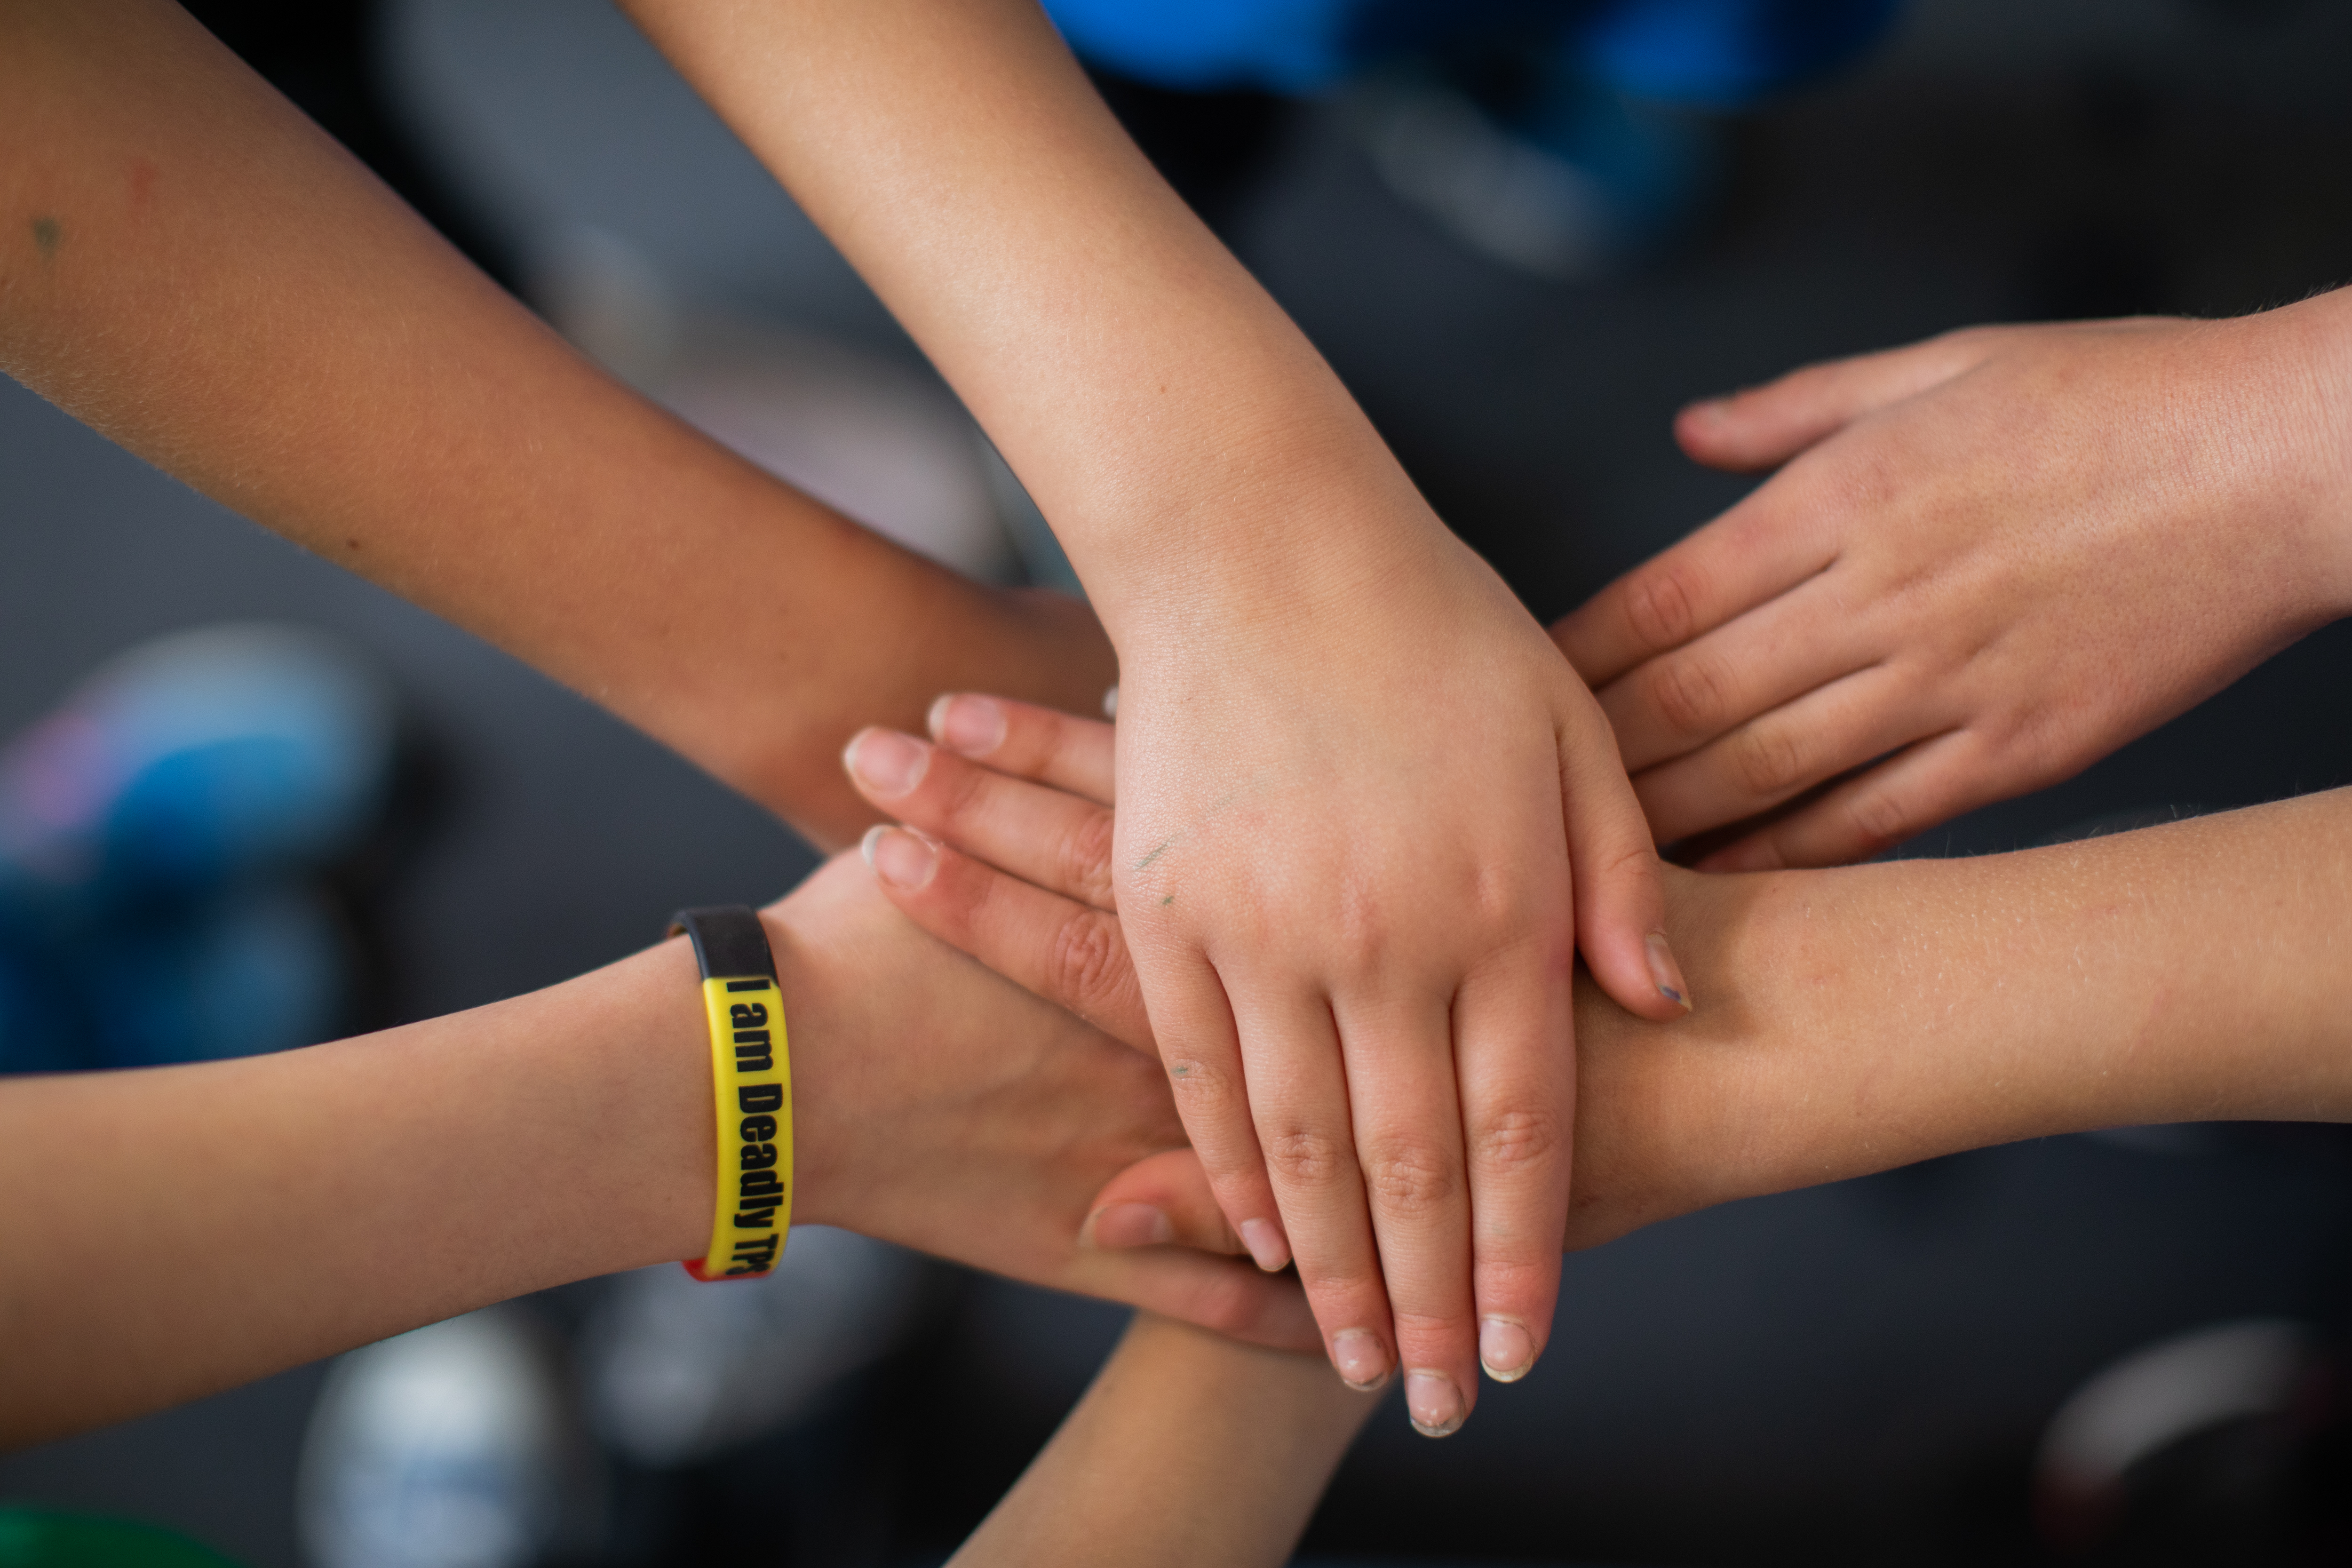 Six hands stacked on top of each other. One child is wearing a wrist band that says 'I am deadly' in black, yellow and red.